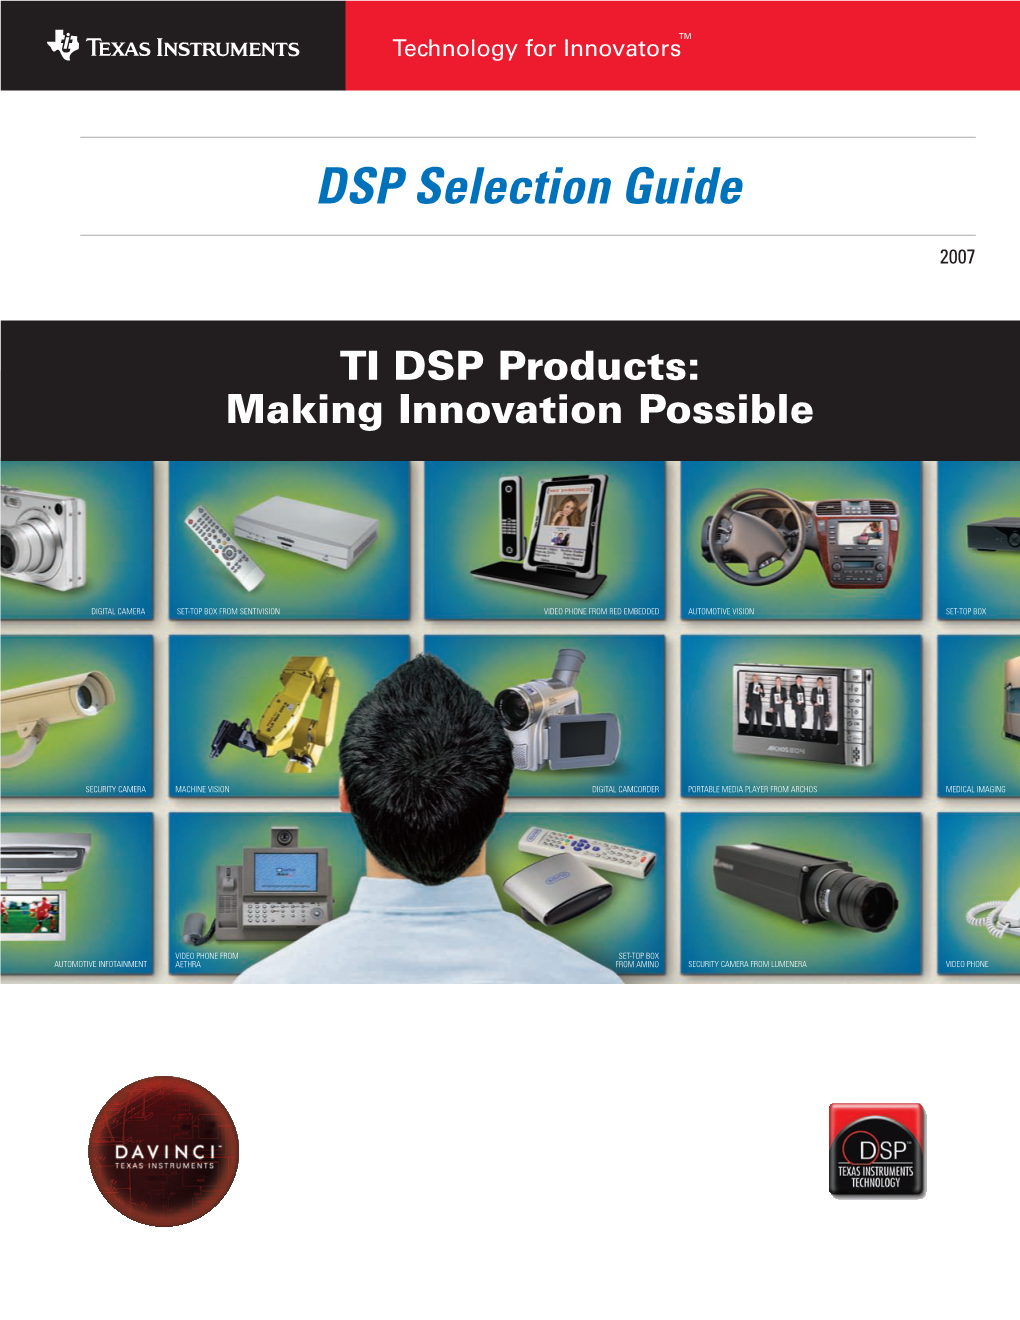 DSP Selection Guide 2007